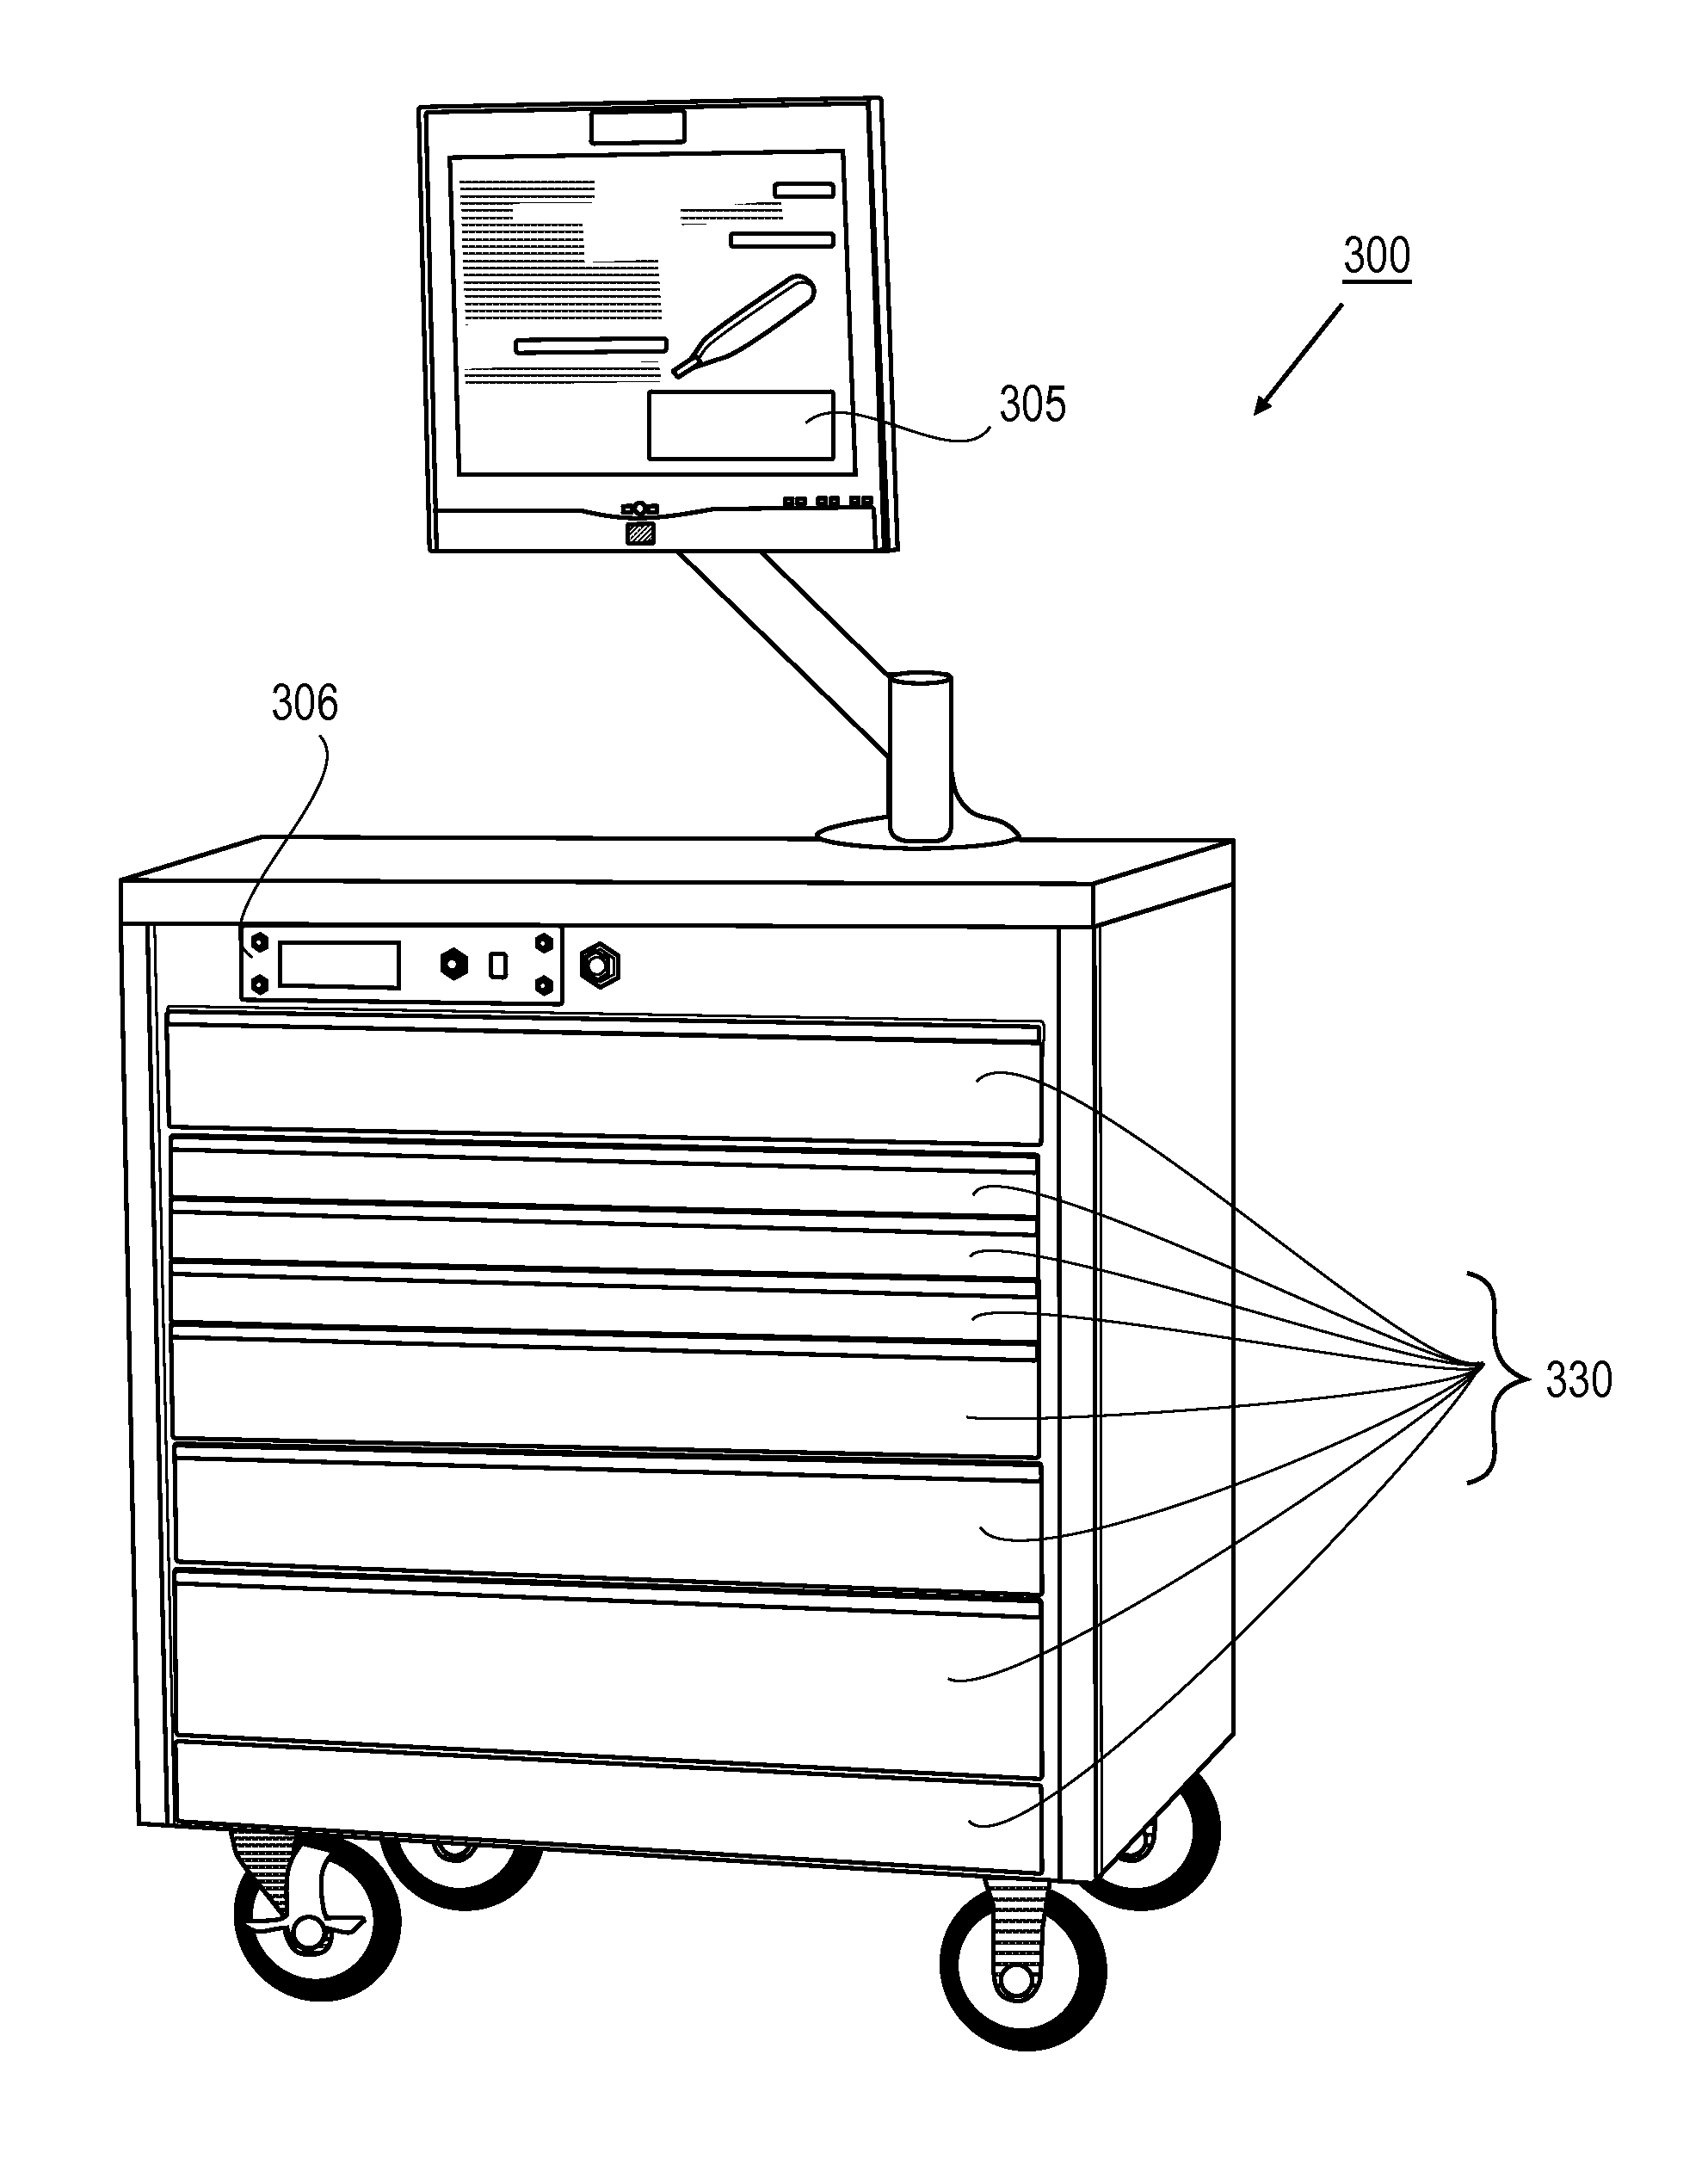 Image-based inventory control system